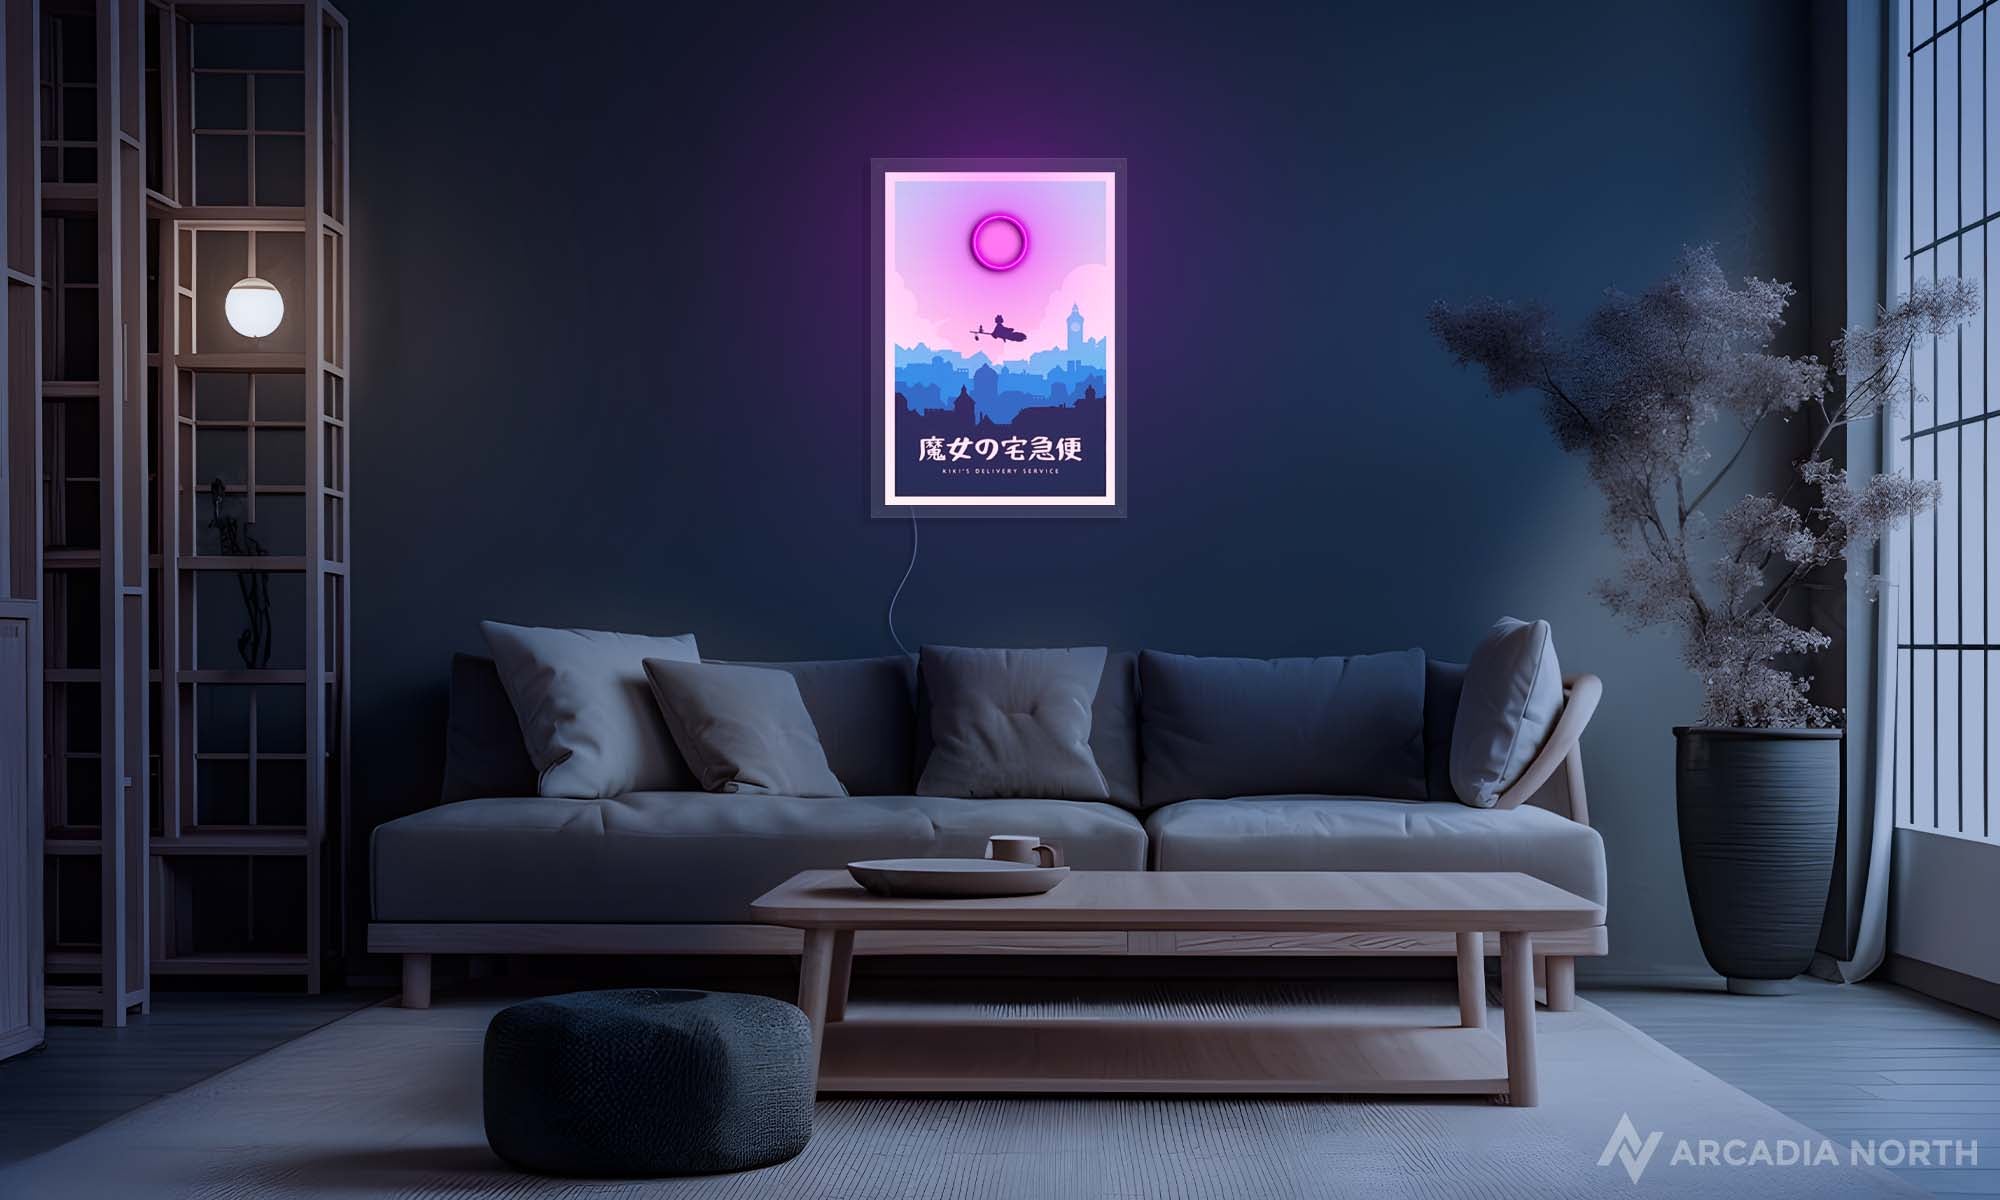 Modern living room with a Studio Ghibli Kiki's Delivery Service minimalistic acrylic poster with a neon LED light on the wall above a couch